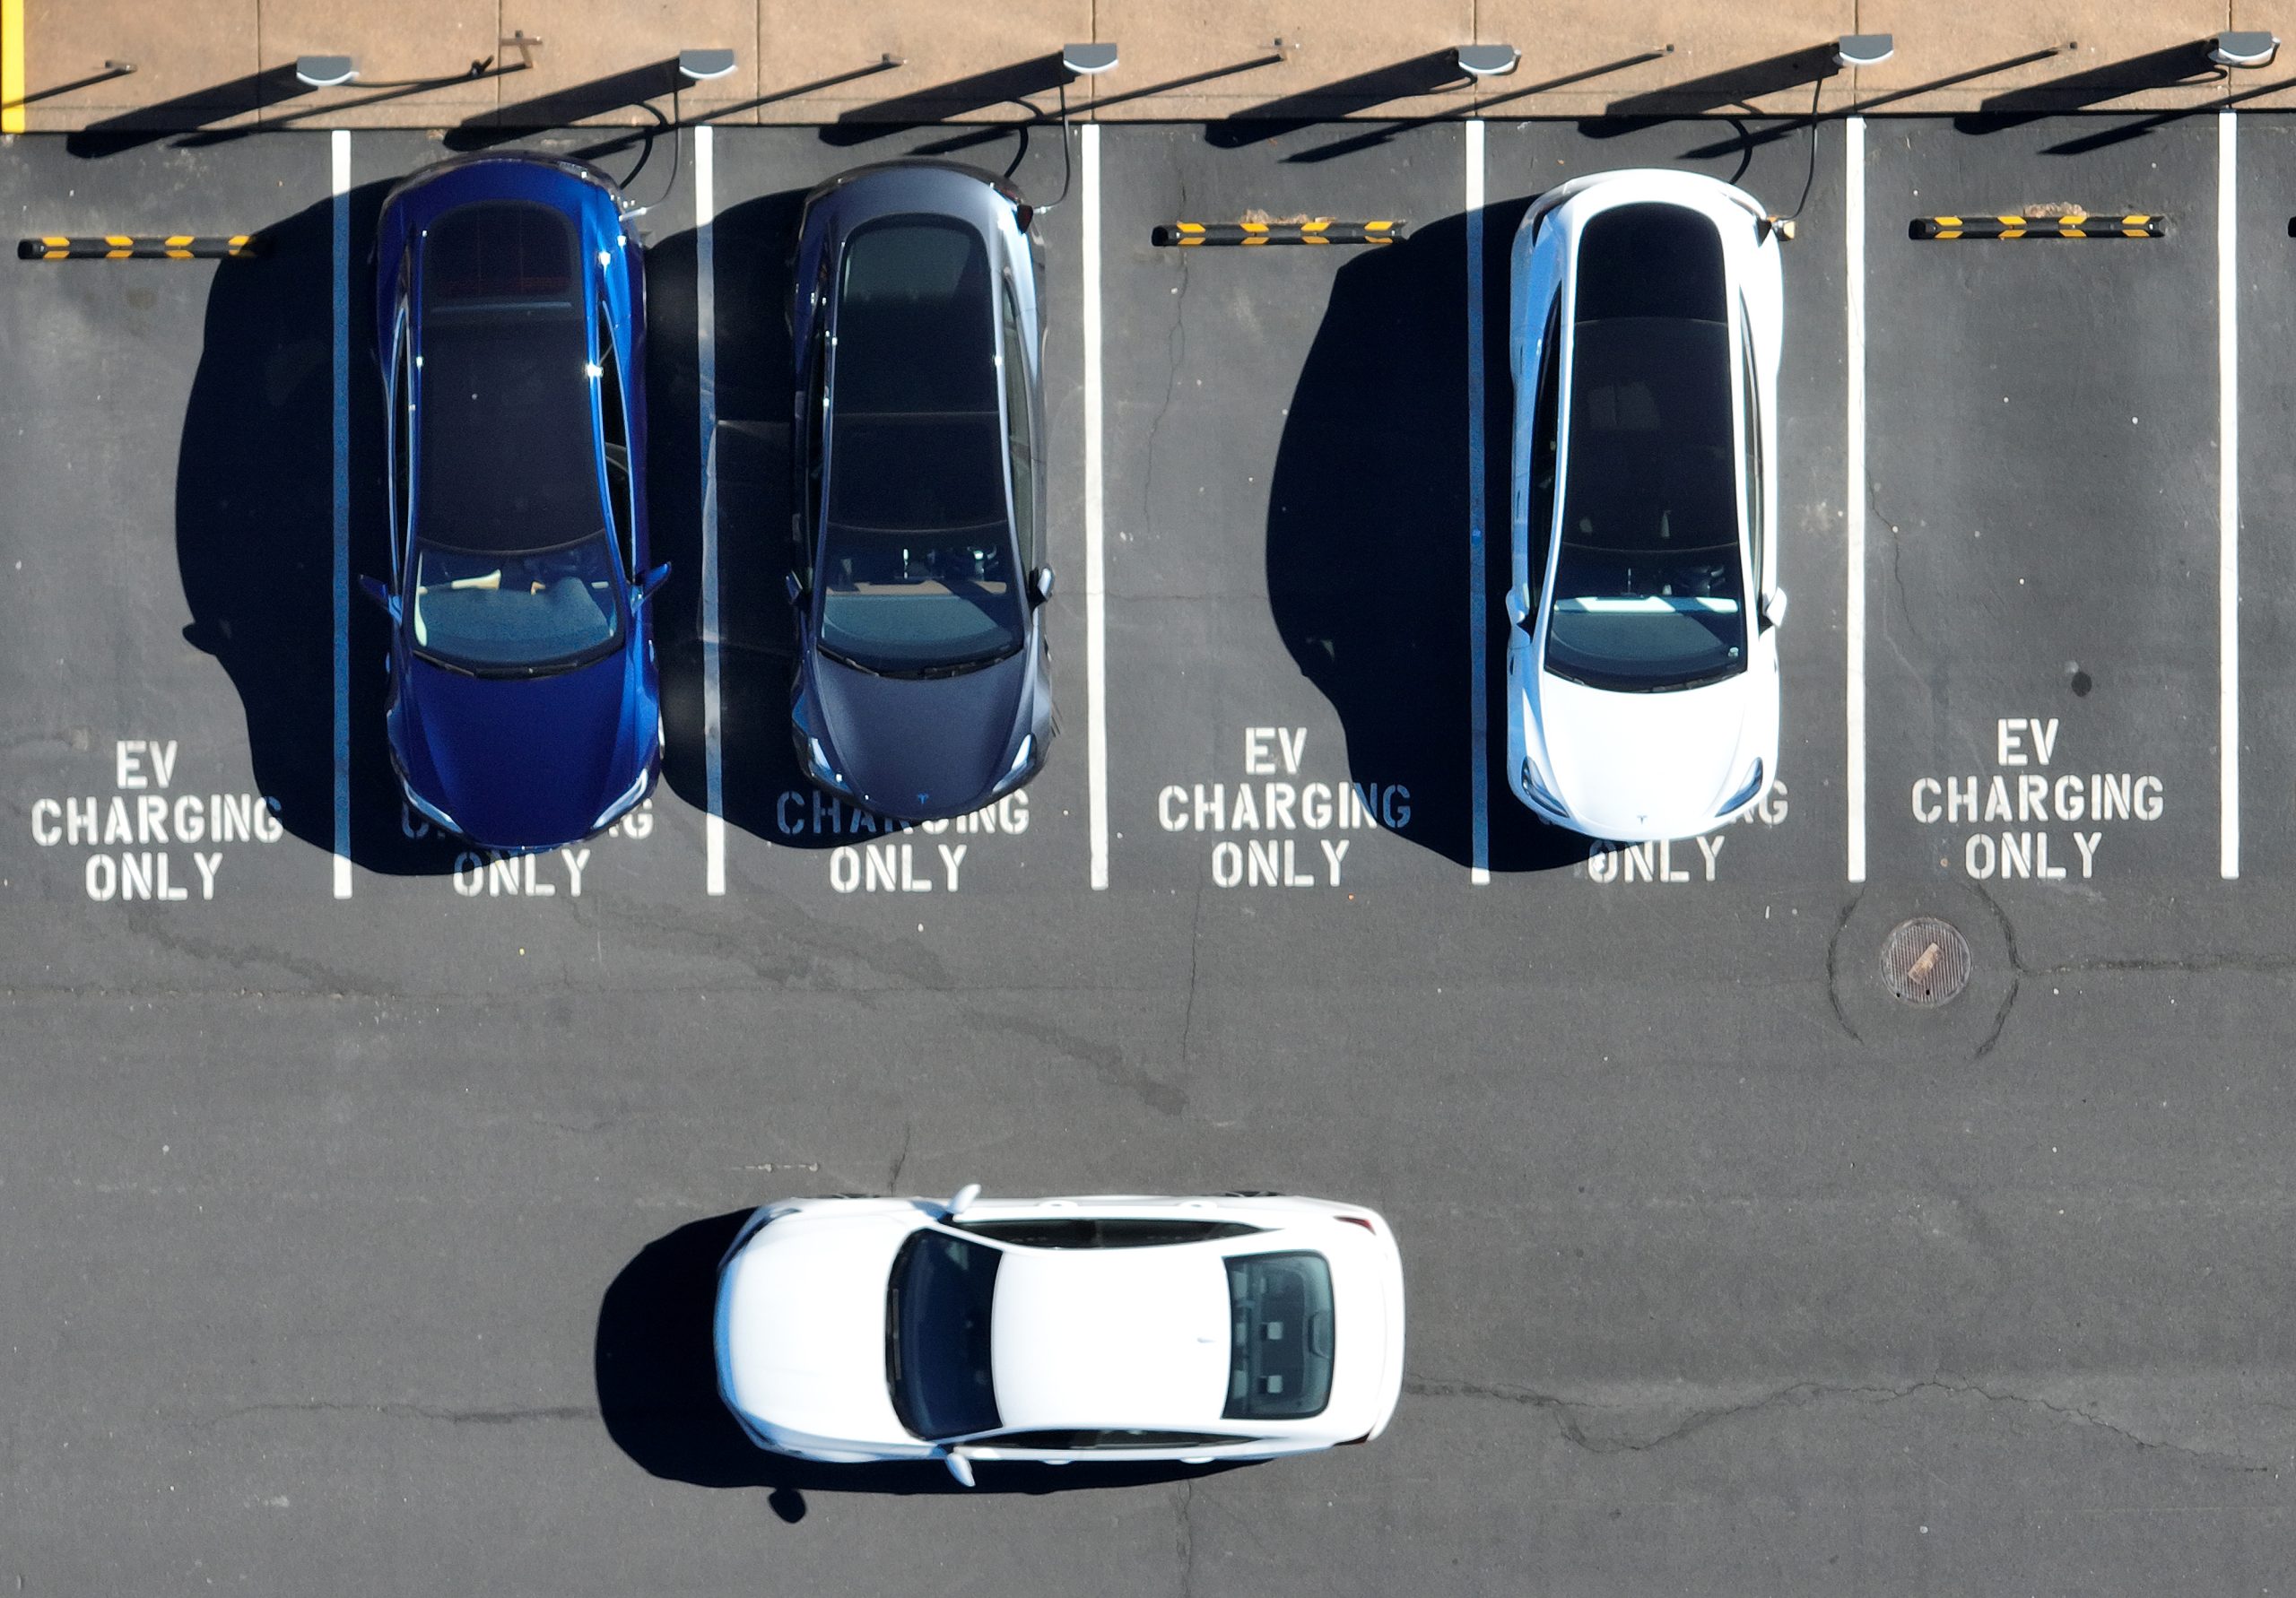 Why America’s EV chargers keep breaking